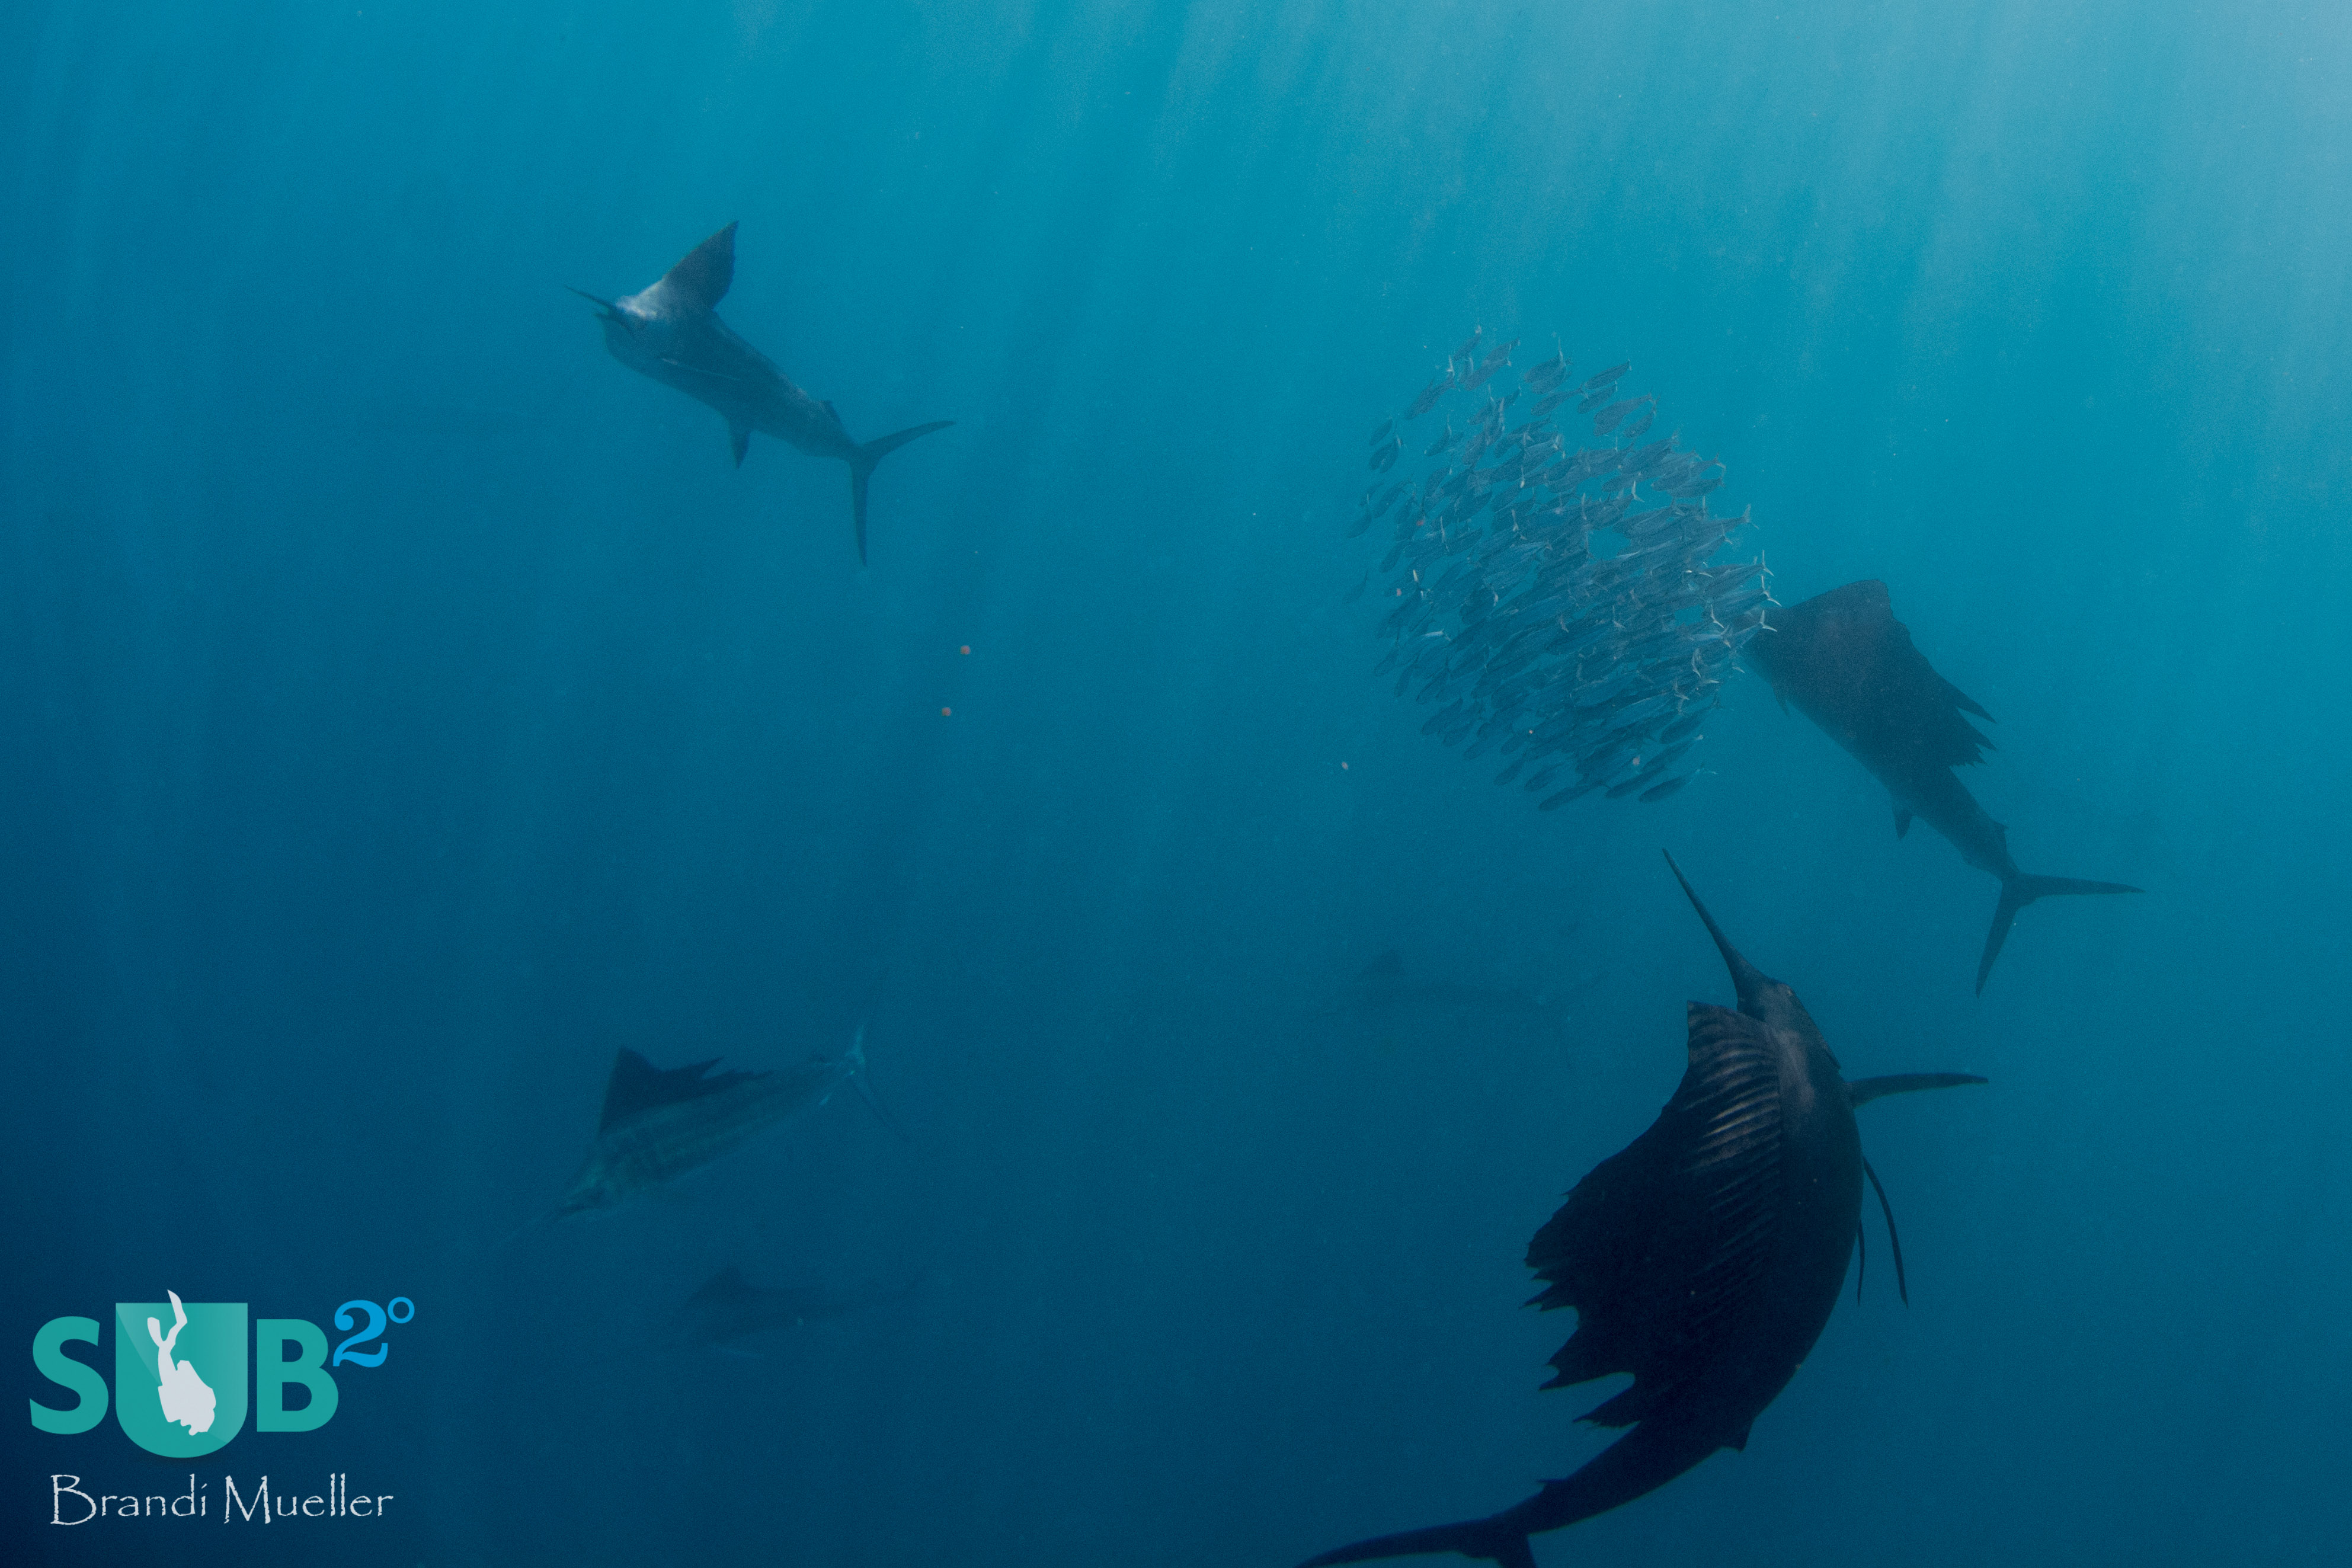 Sailfish are consistently clocked as the fastest fish in the ocean, reaching speeds up to 68mph (110kmph).